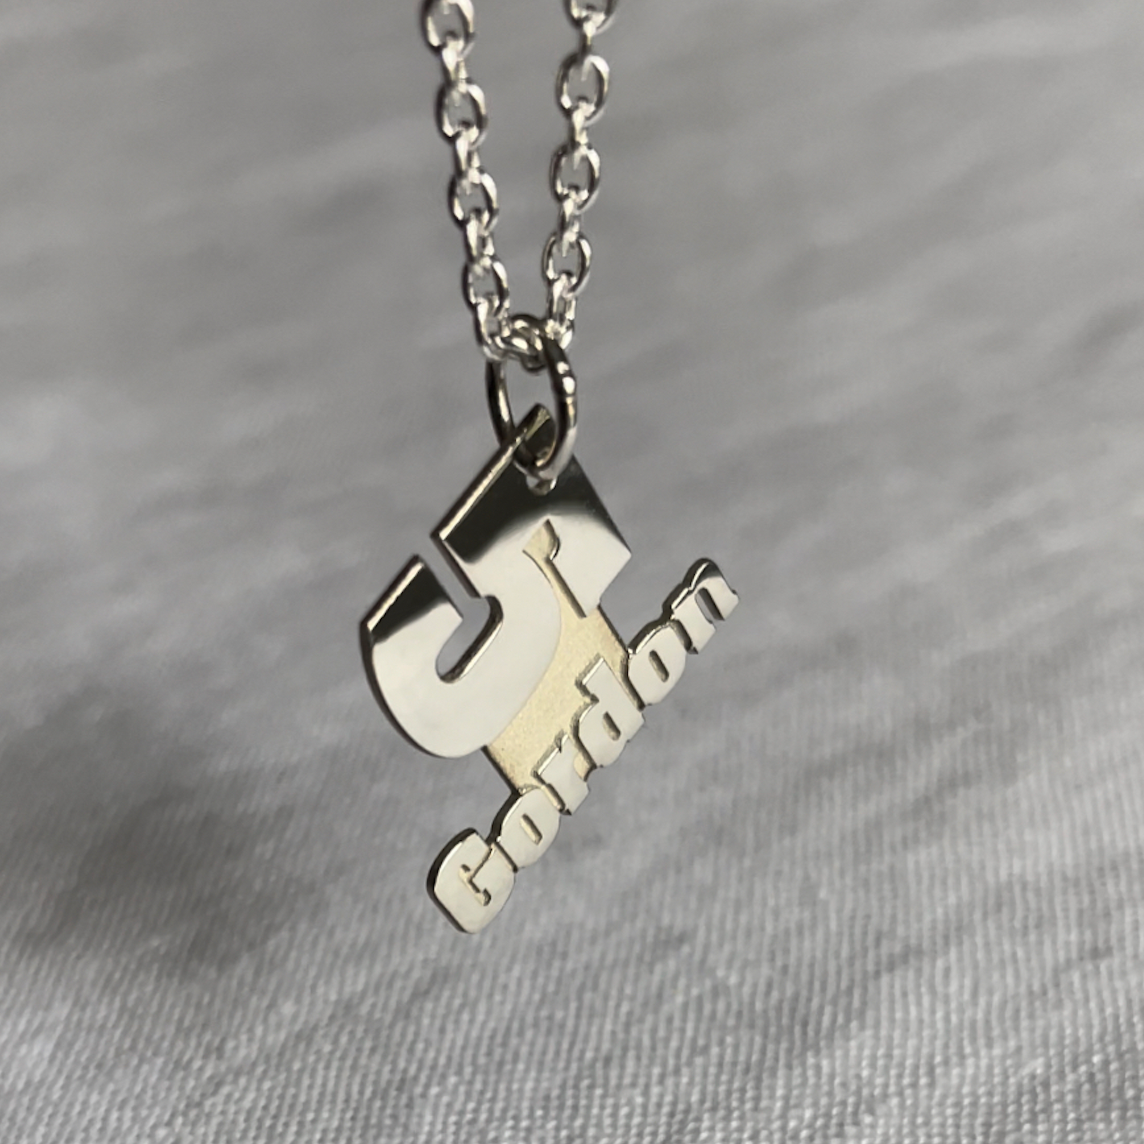 Stacked Number and Name Pendant / Charm Gift For Athlete for Any Sport